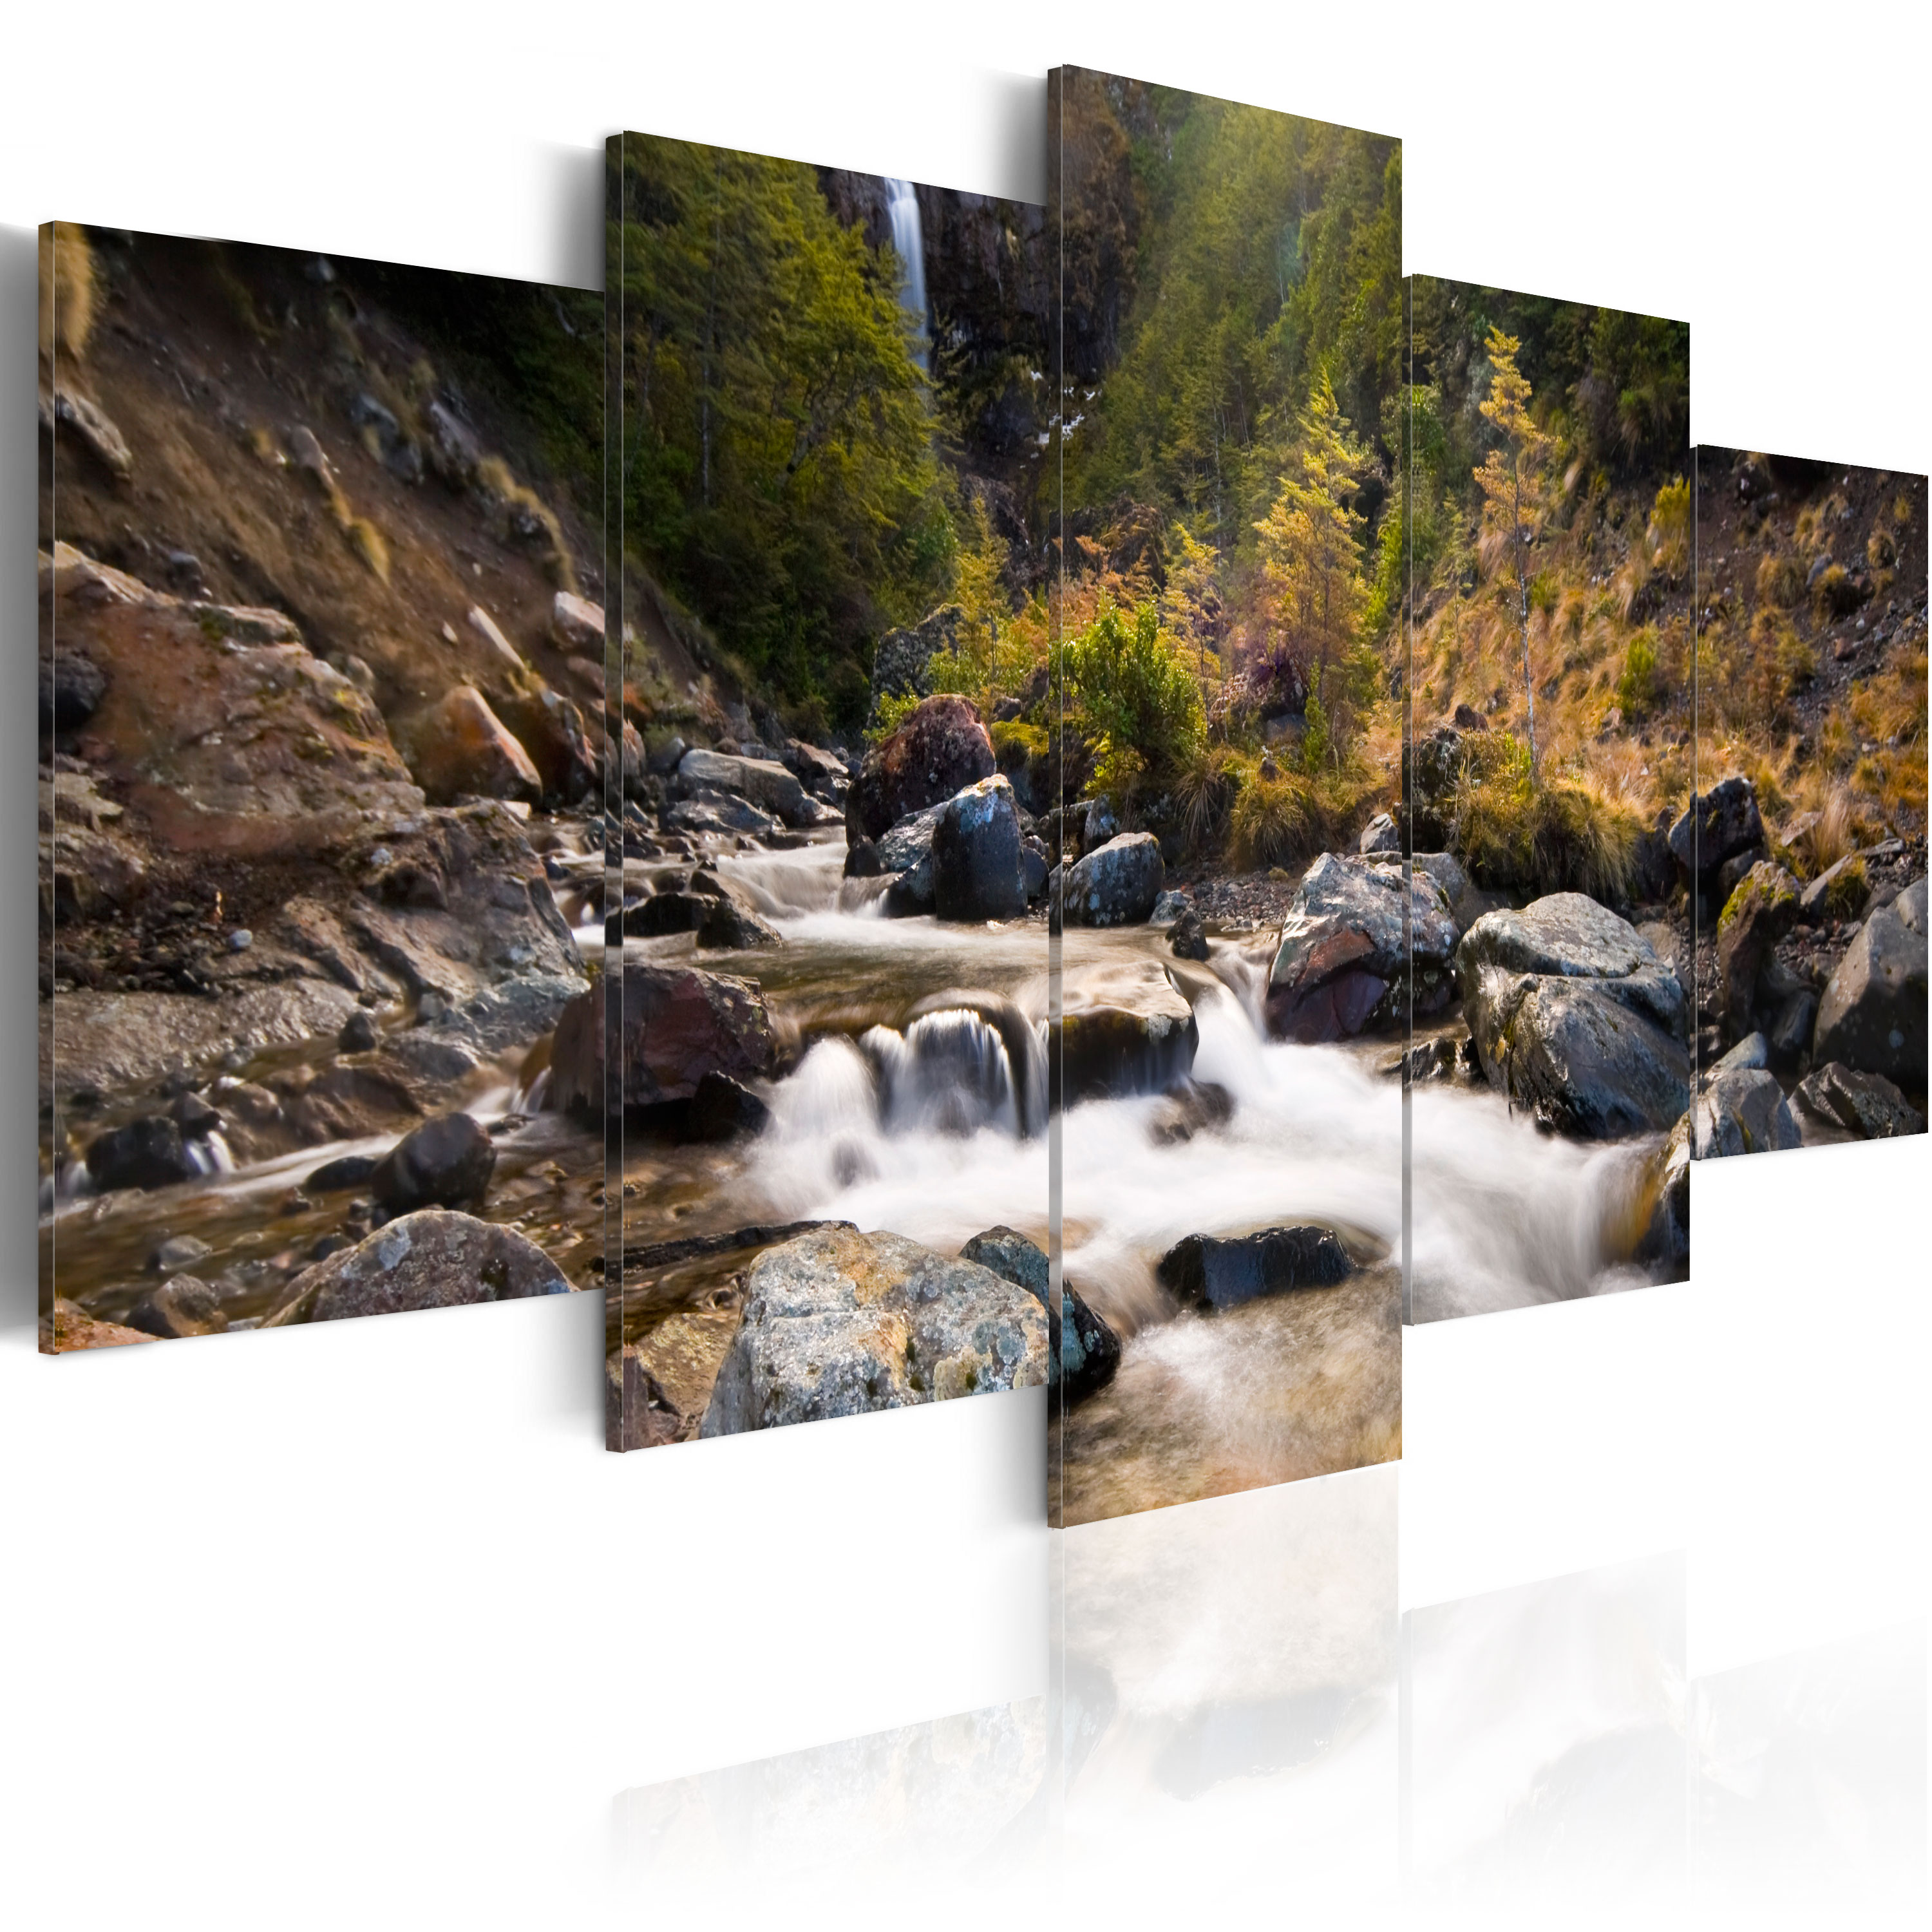 Canvas Print - A waterfall in the middle of wild nature - 200x100